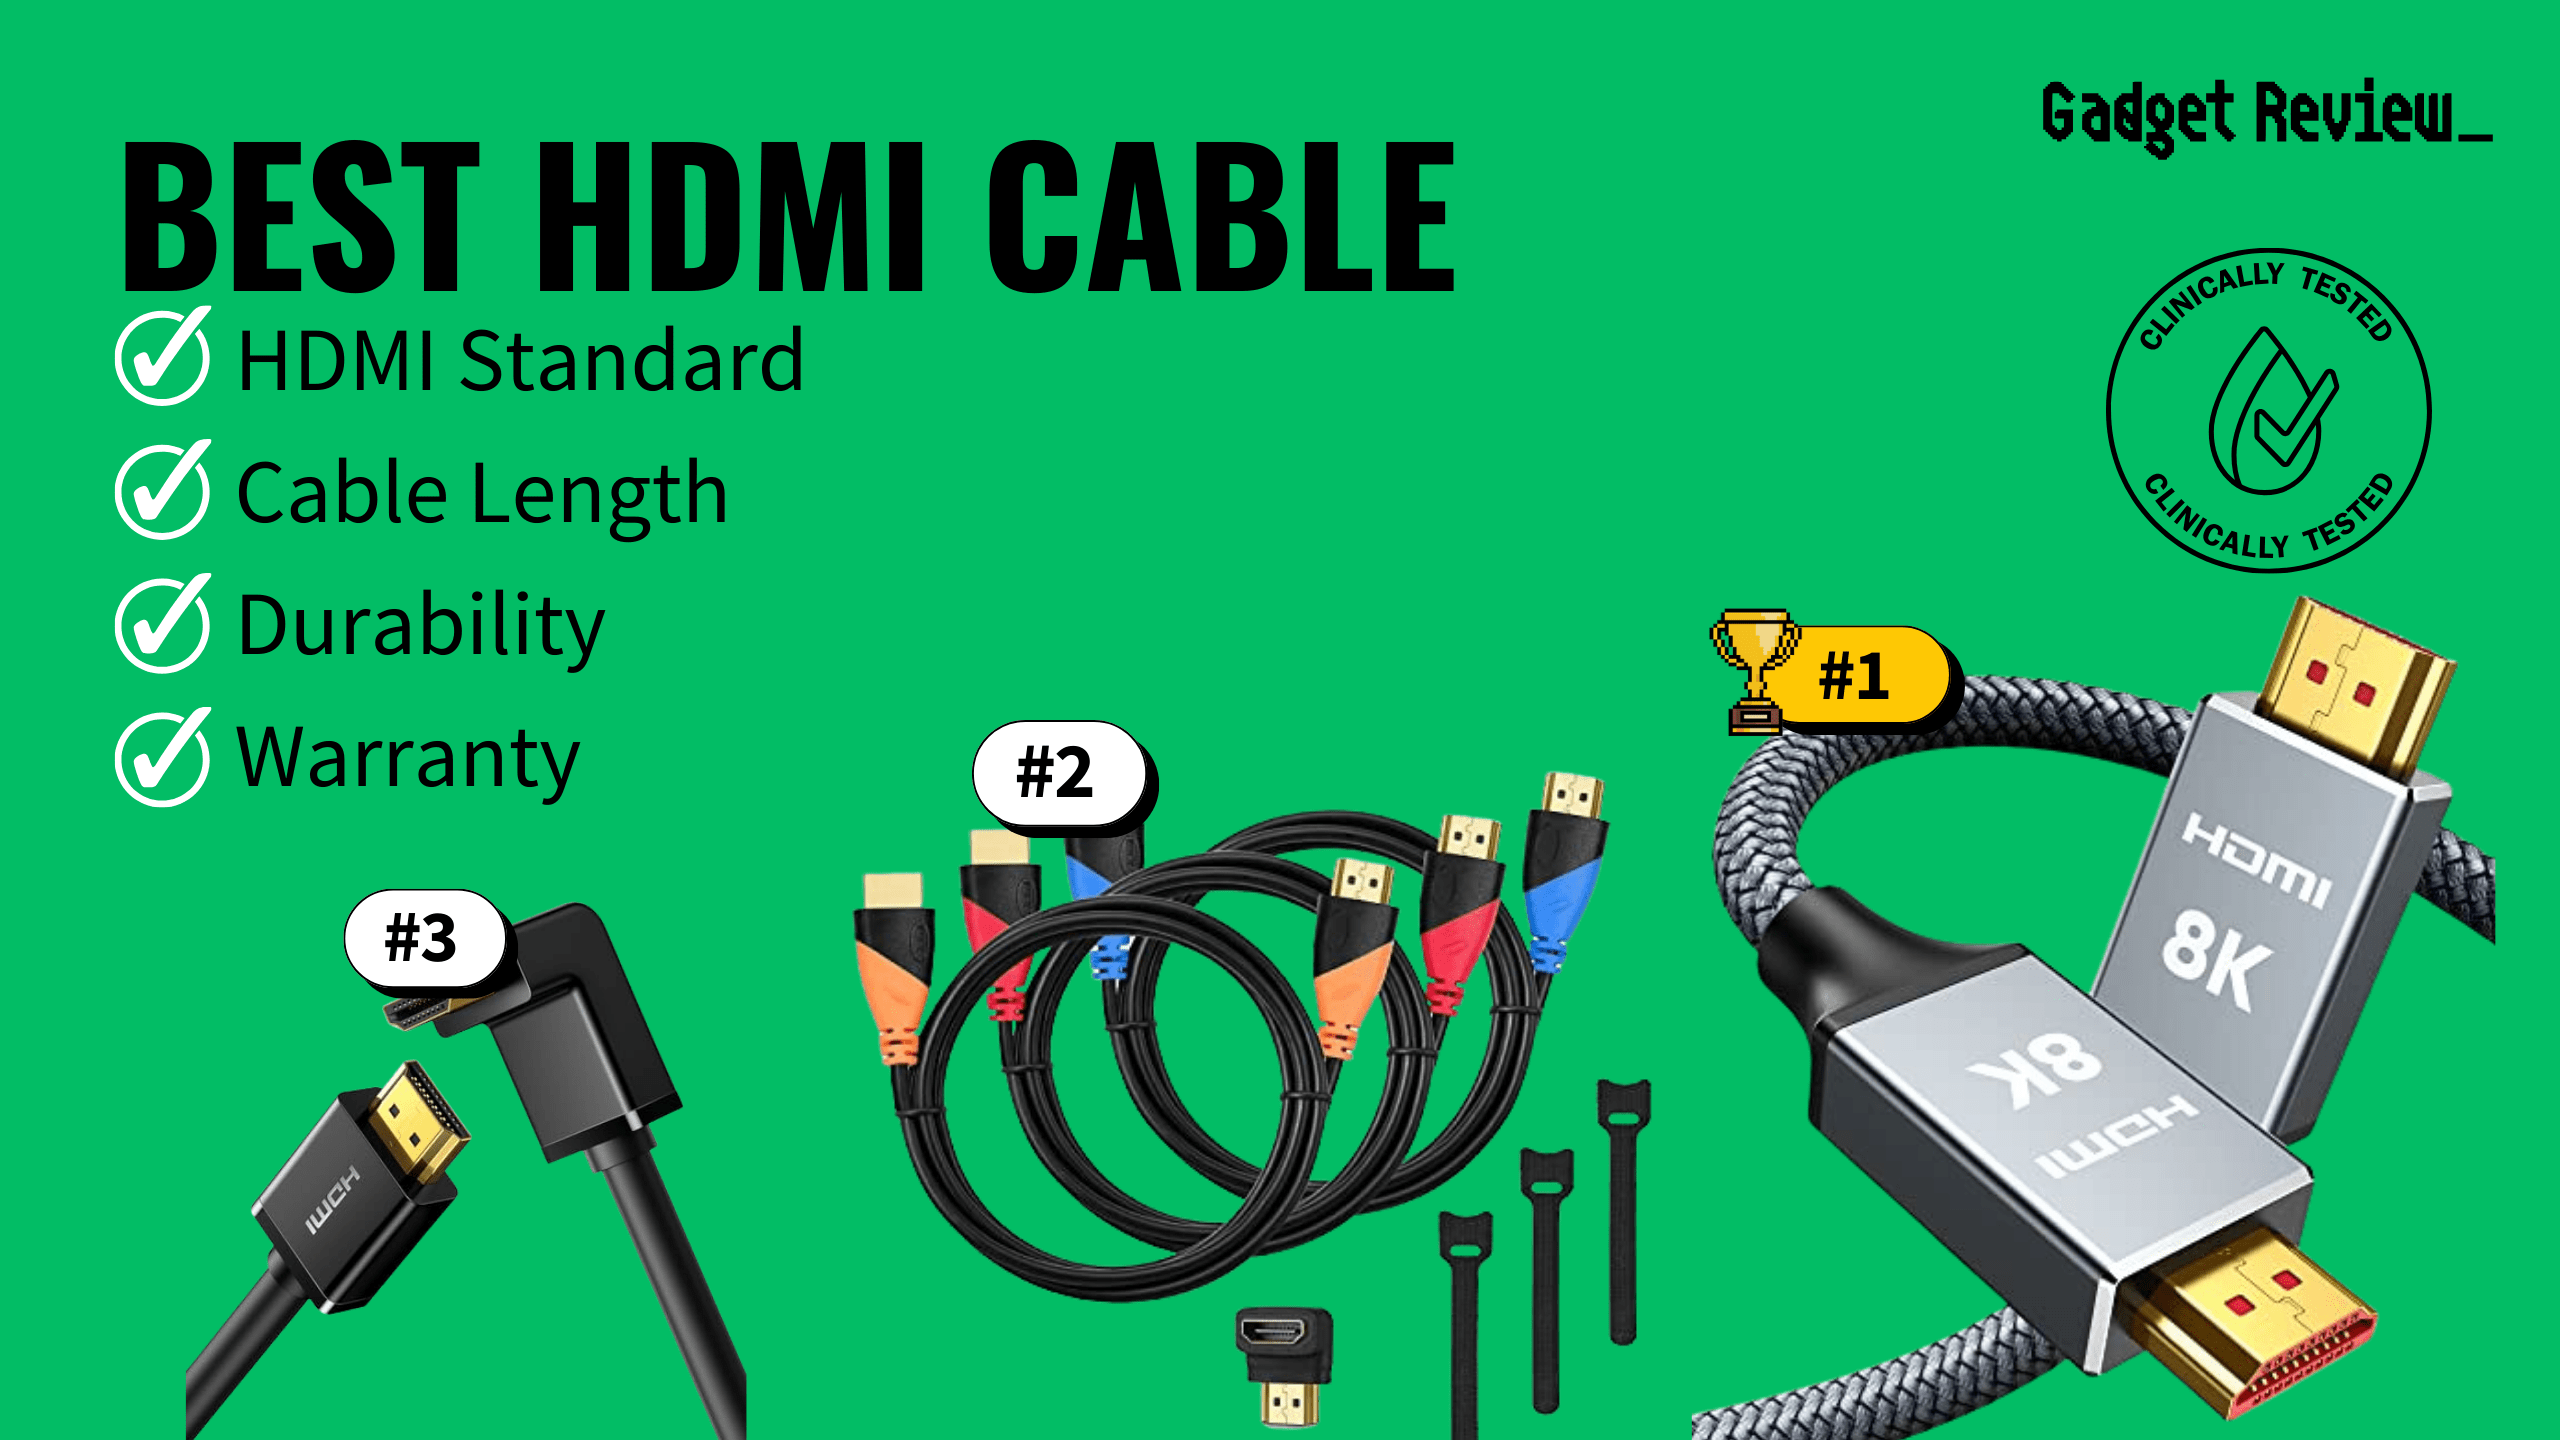 best hdmi cable featured image that shows the top three best tv accessorie models